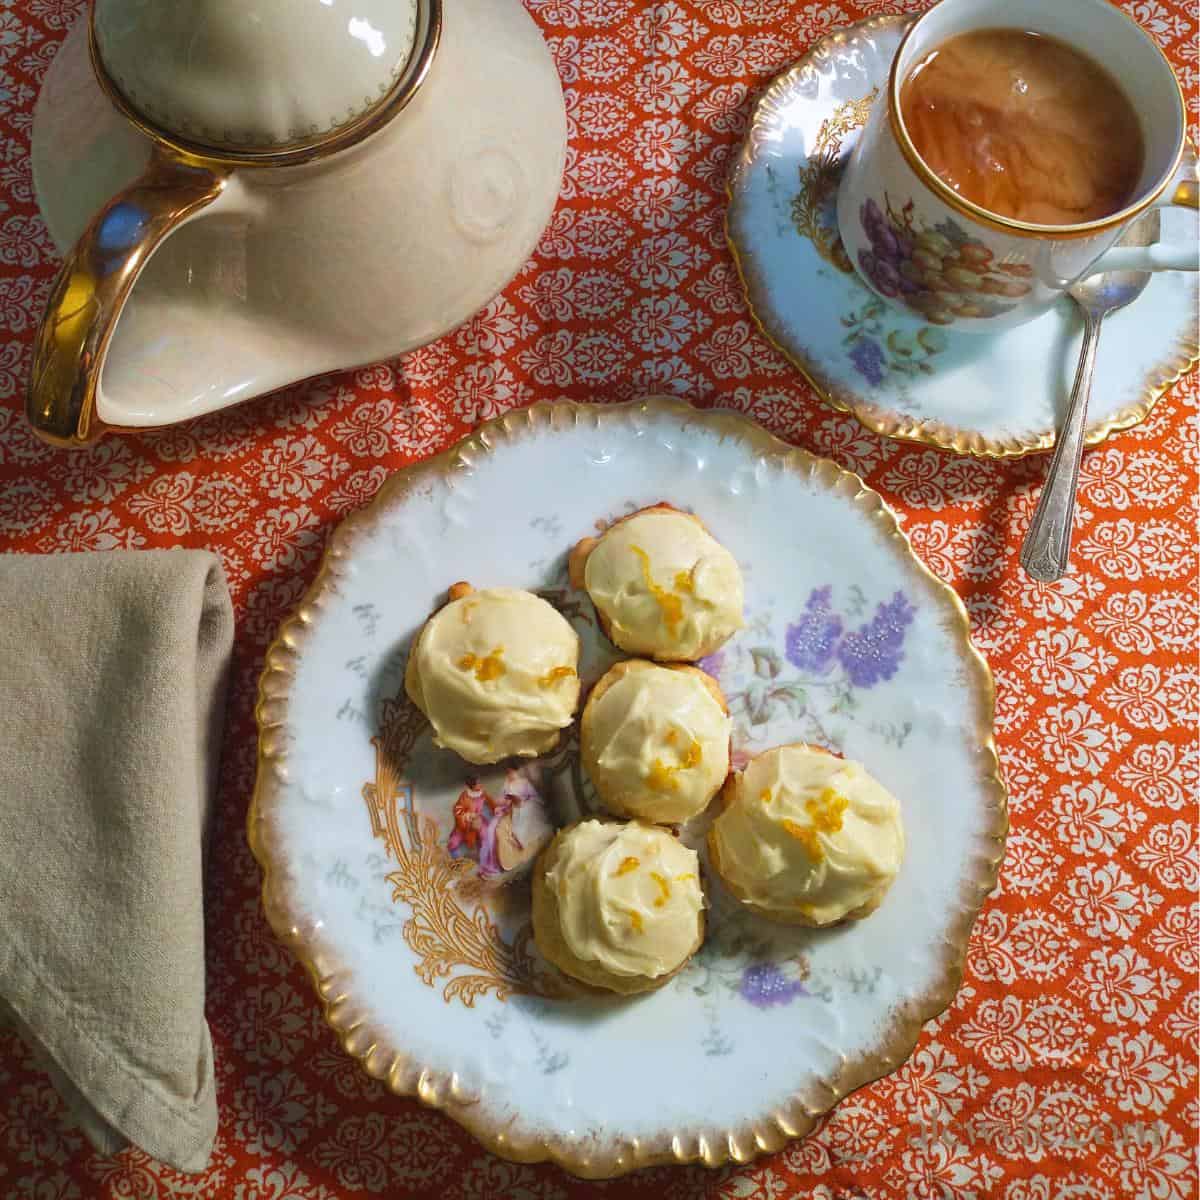 a fancy gilded antique china place setting with a teapot, a cup of tea with cream, a folded cloth napkin, and a plate of frosted creamsicle cookies, garnished with orange zest.